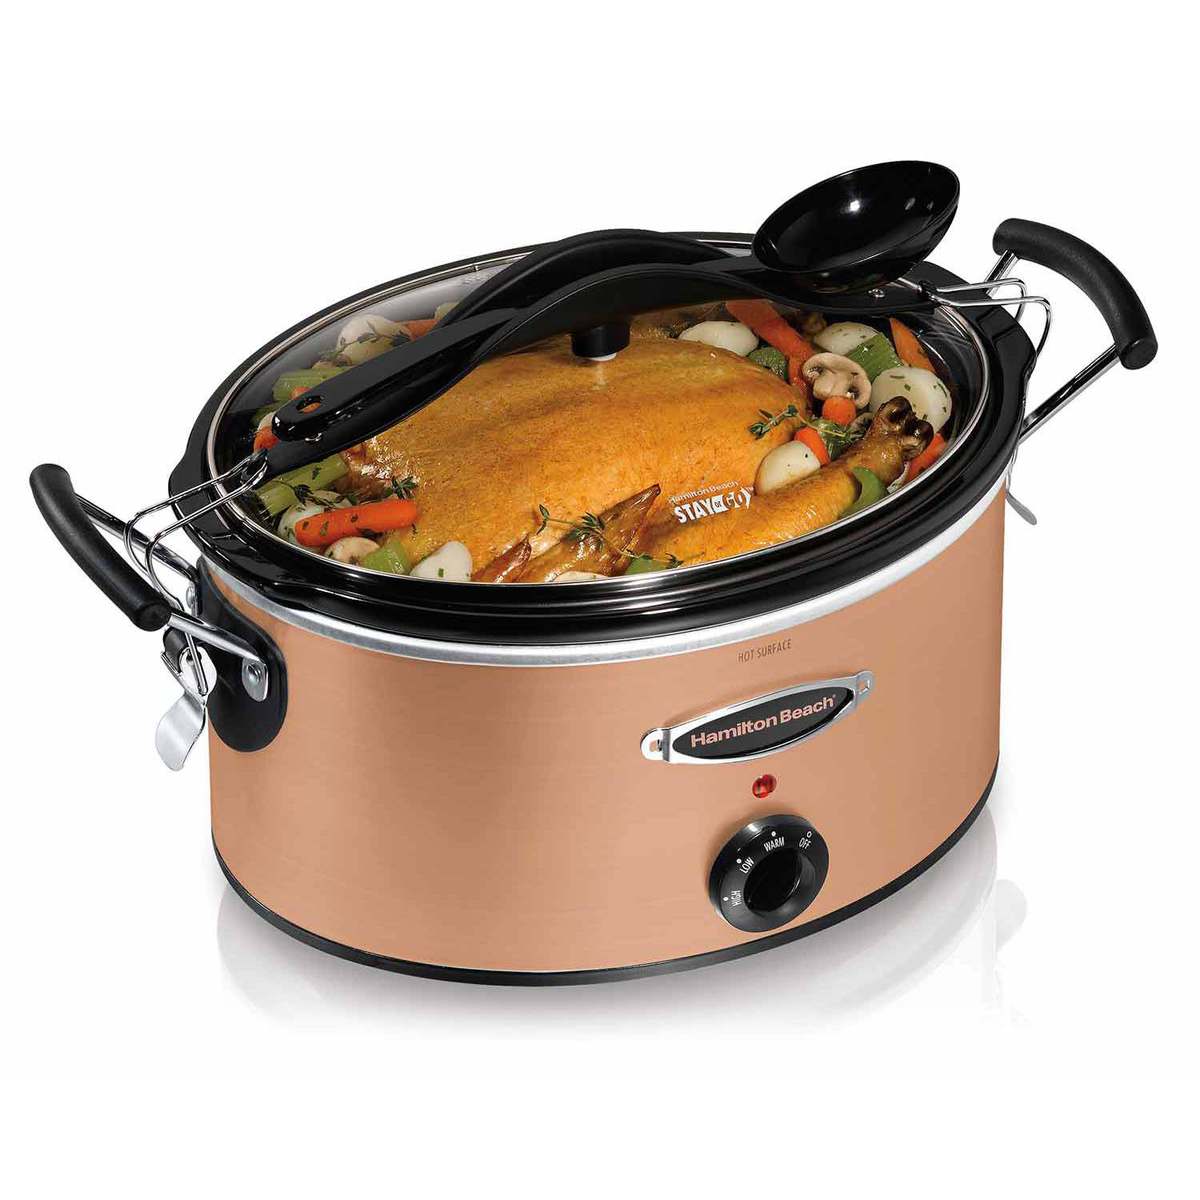 Stay or Go® 6 Quart Copper-look Slow Cooker (33164)